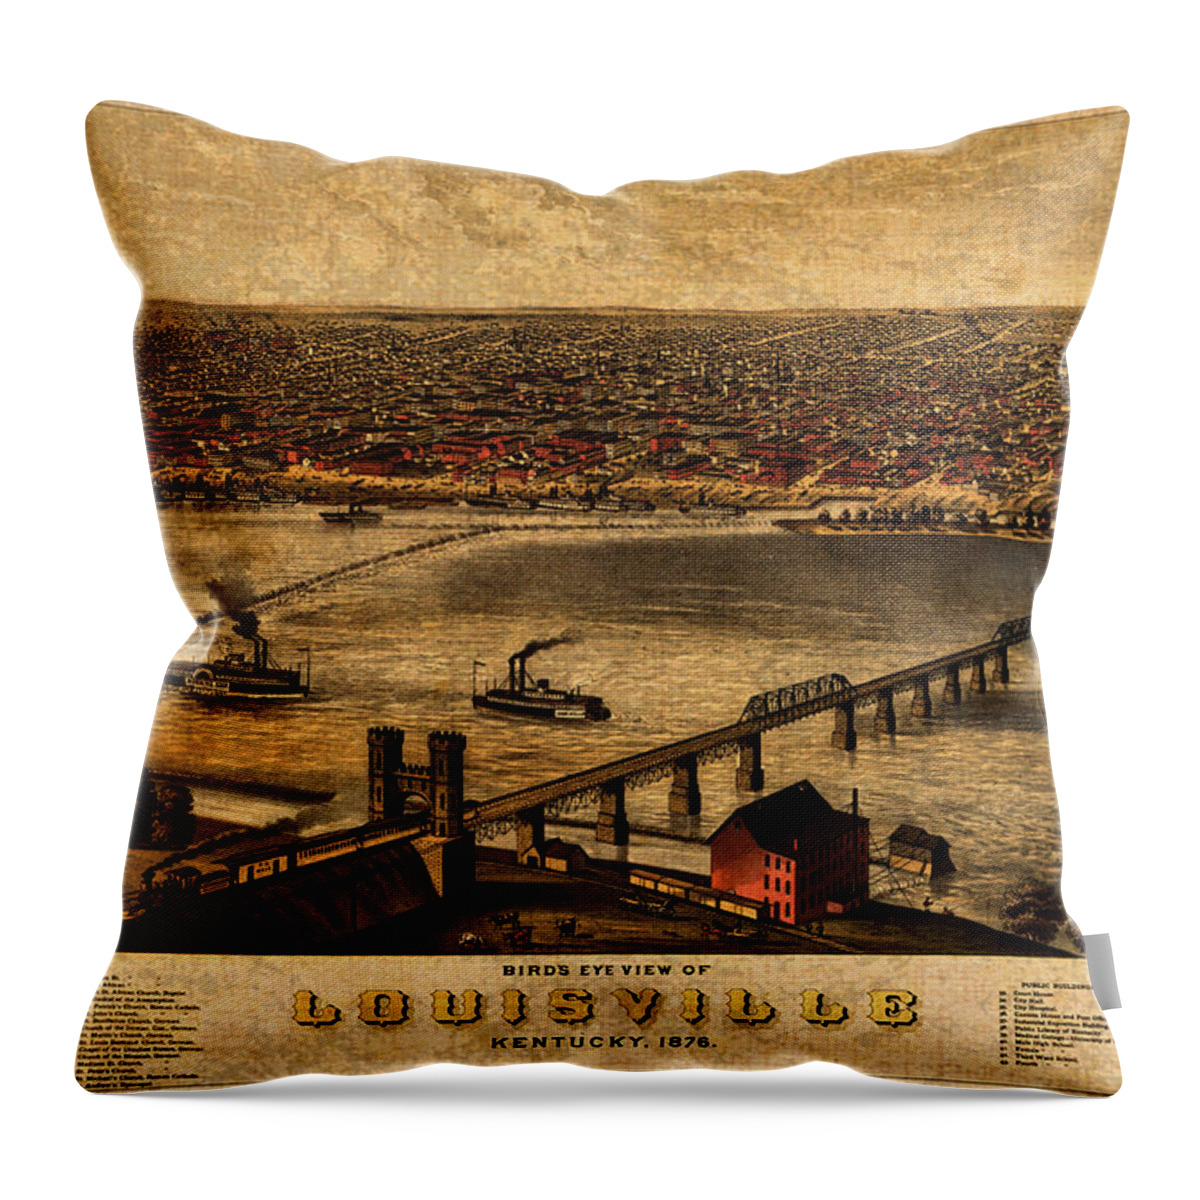 Map Of Louisville Throw Pillow featuring the mixed media Map of Louisville Kentucky Vintage Birds Eye View Aerial Schematic on Old Distressed Canvas by Design Turnpike